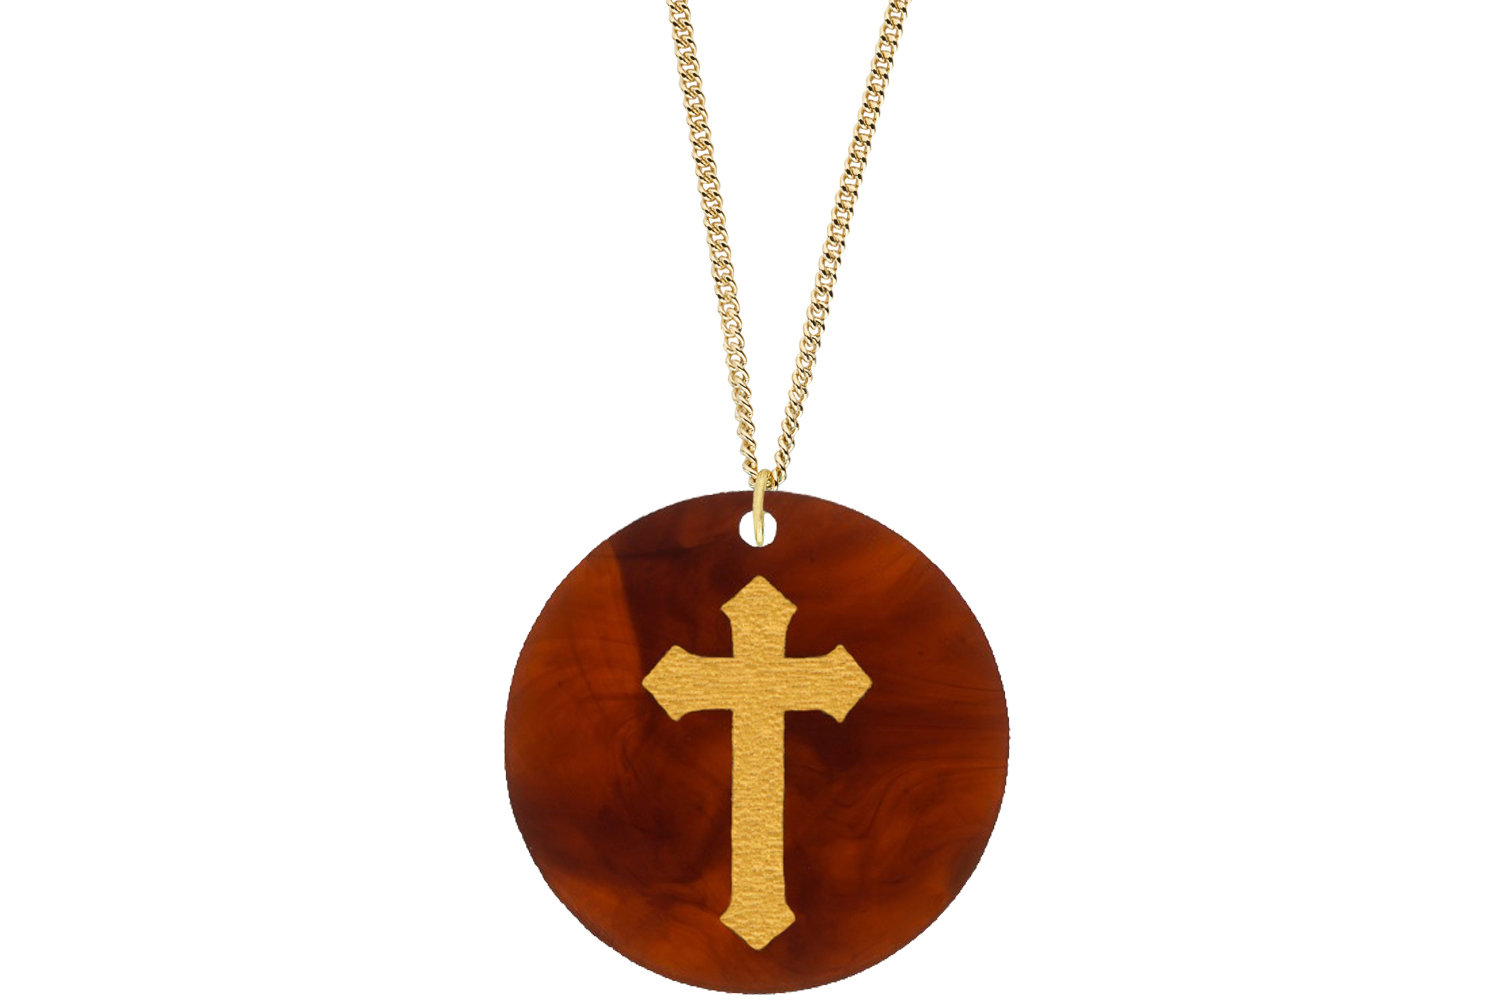 Cross Pendant Subtle Style Refined with Paint on Chain Necklace